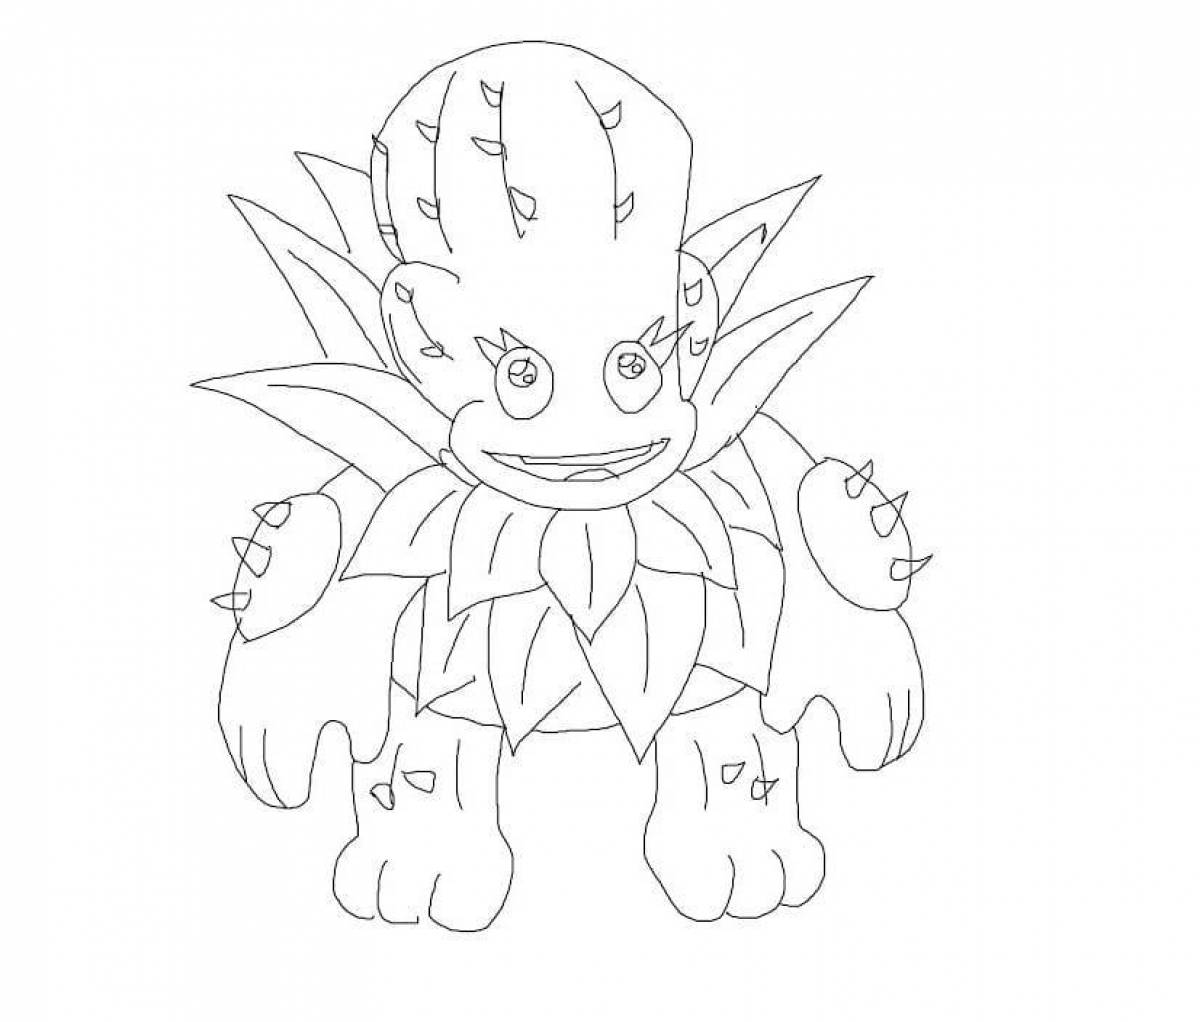 Singing monsters beckoning coloring page